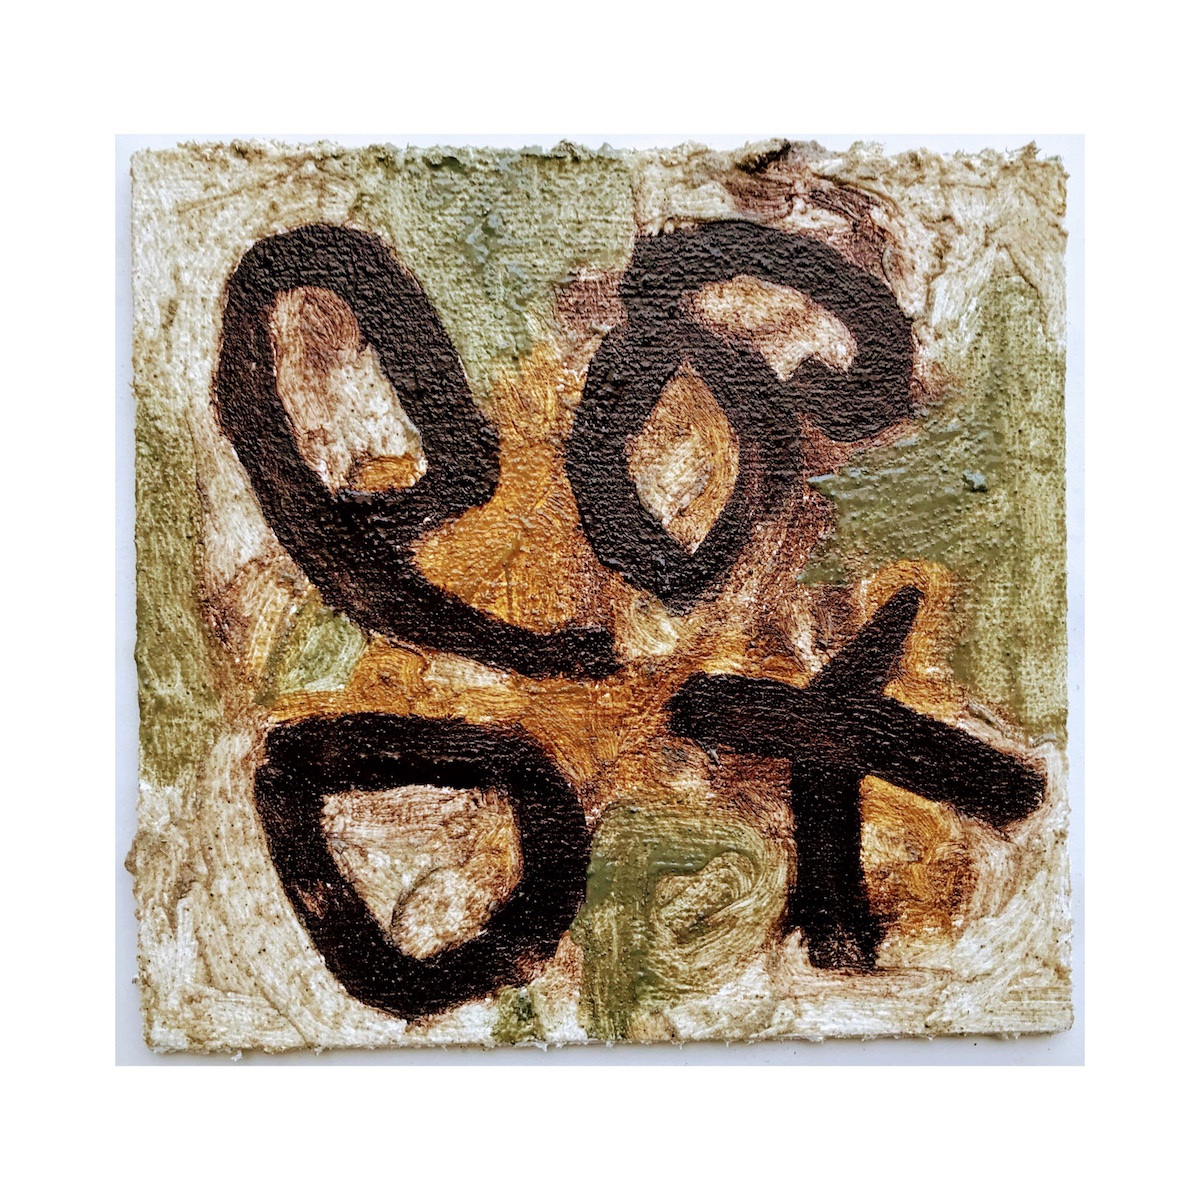 047  devotion (Cornish earth pigments and linseed oil on primed salvaged board; 23x23cm)